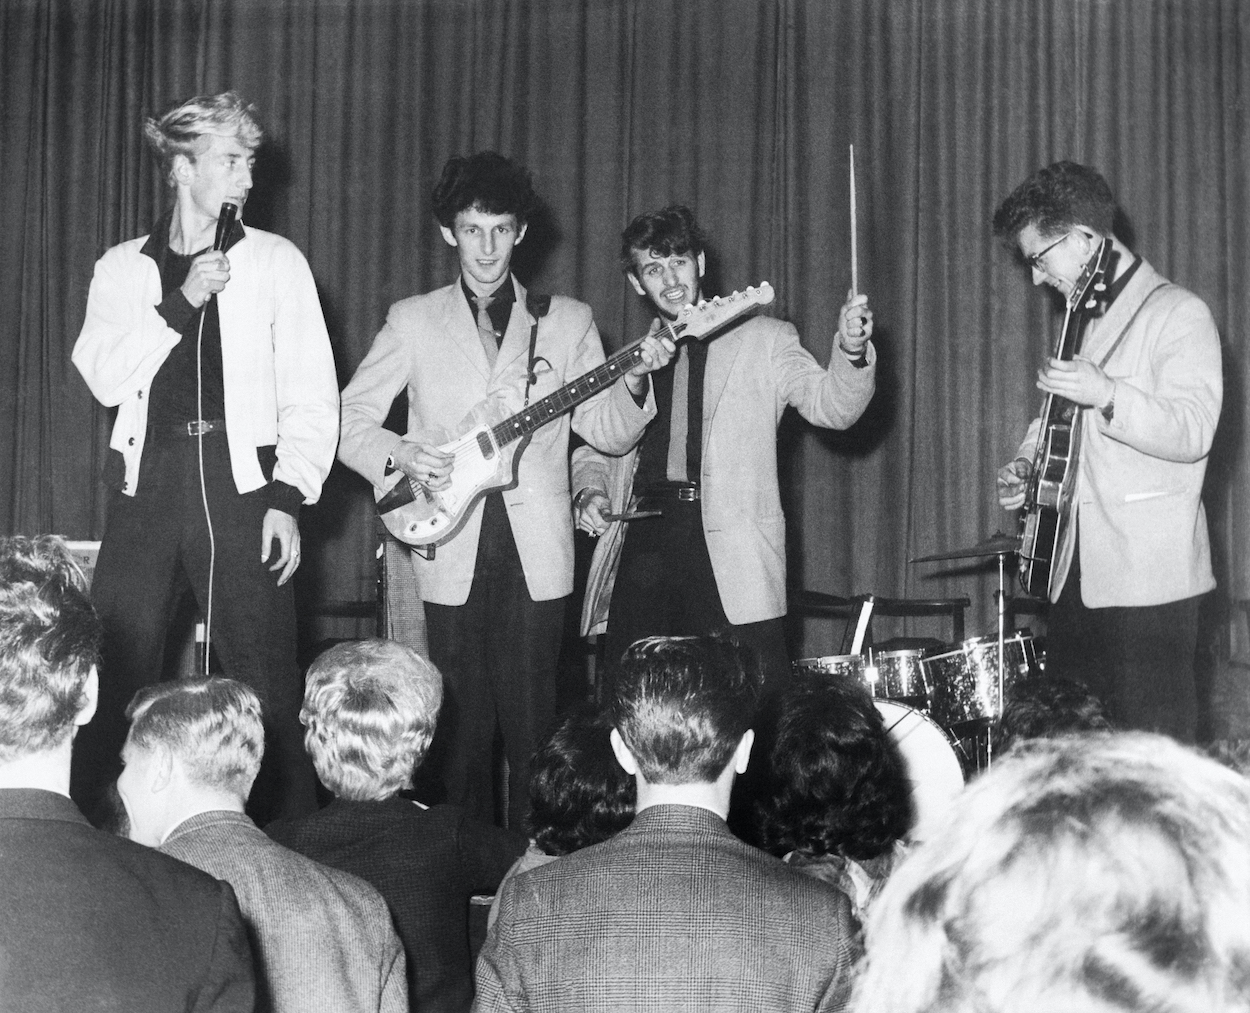 Ringo Starr (second from right) drums during a 1961 concert for Rory Storm and the Hurricanes, Ringo's first successful band that got a German room upgrade thanks to their suits.